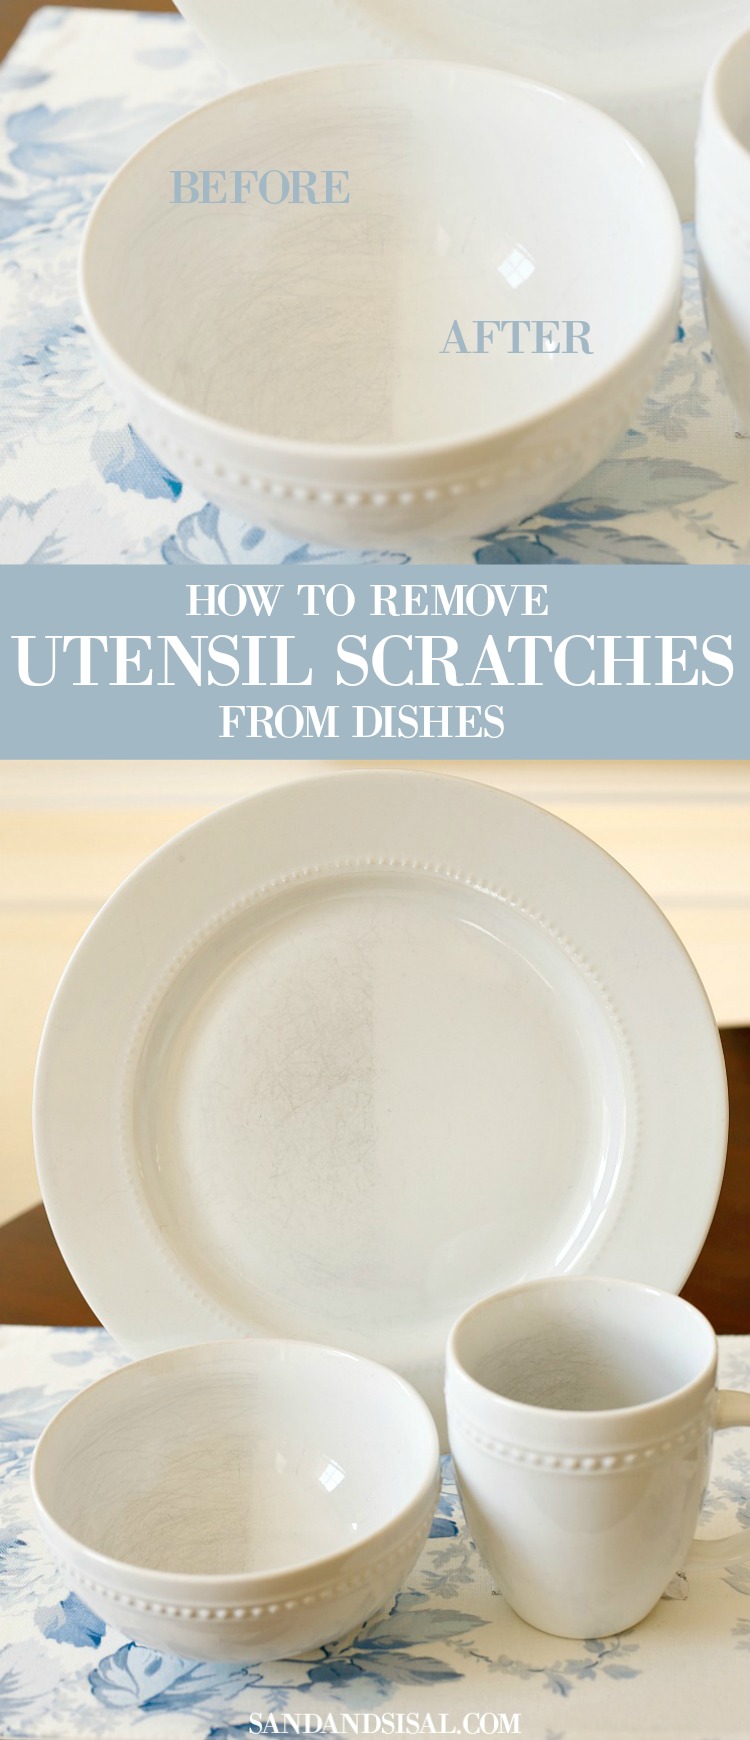 how-to-remove-utensil-scratches-from-dishes-sand-and-sisal